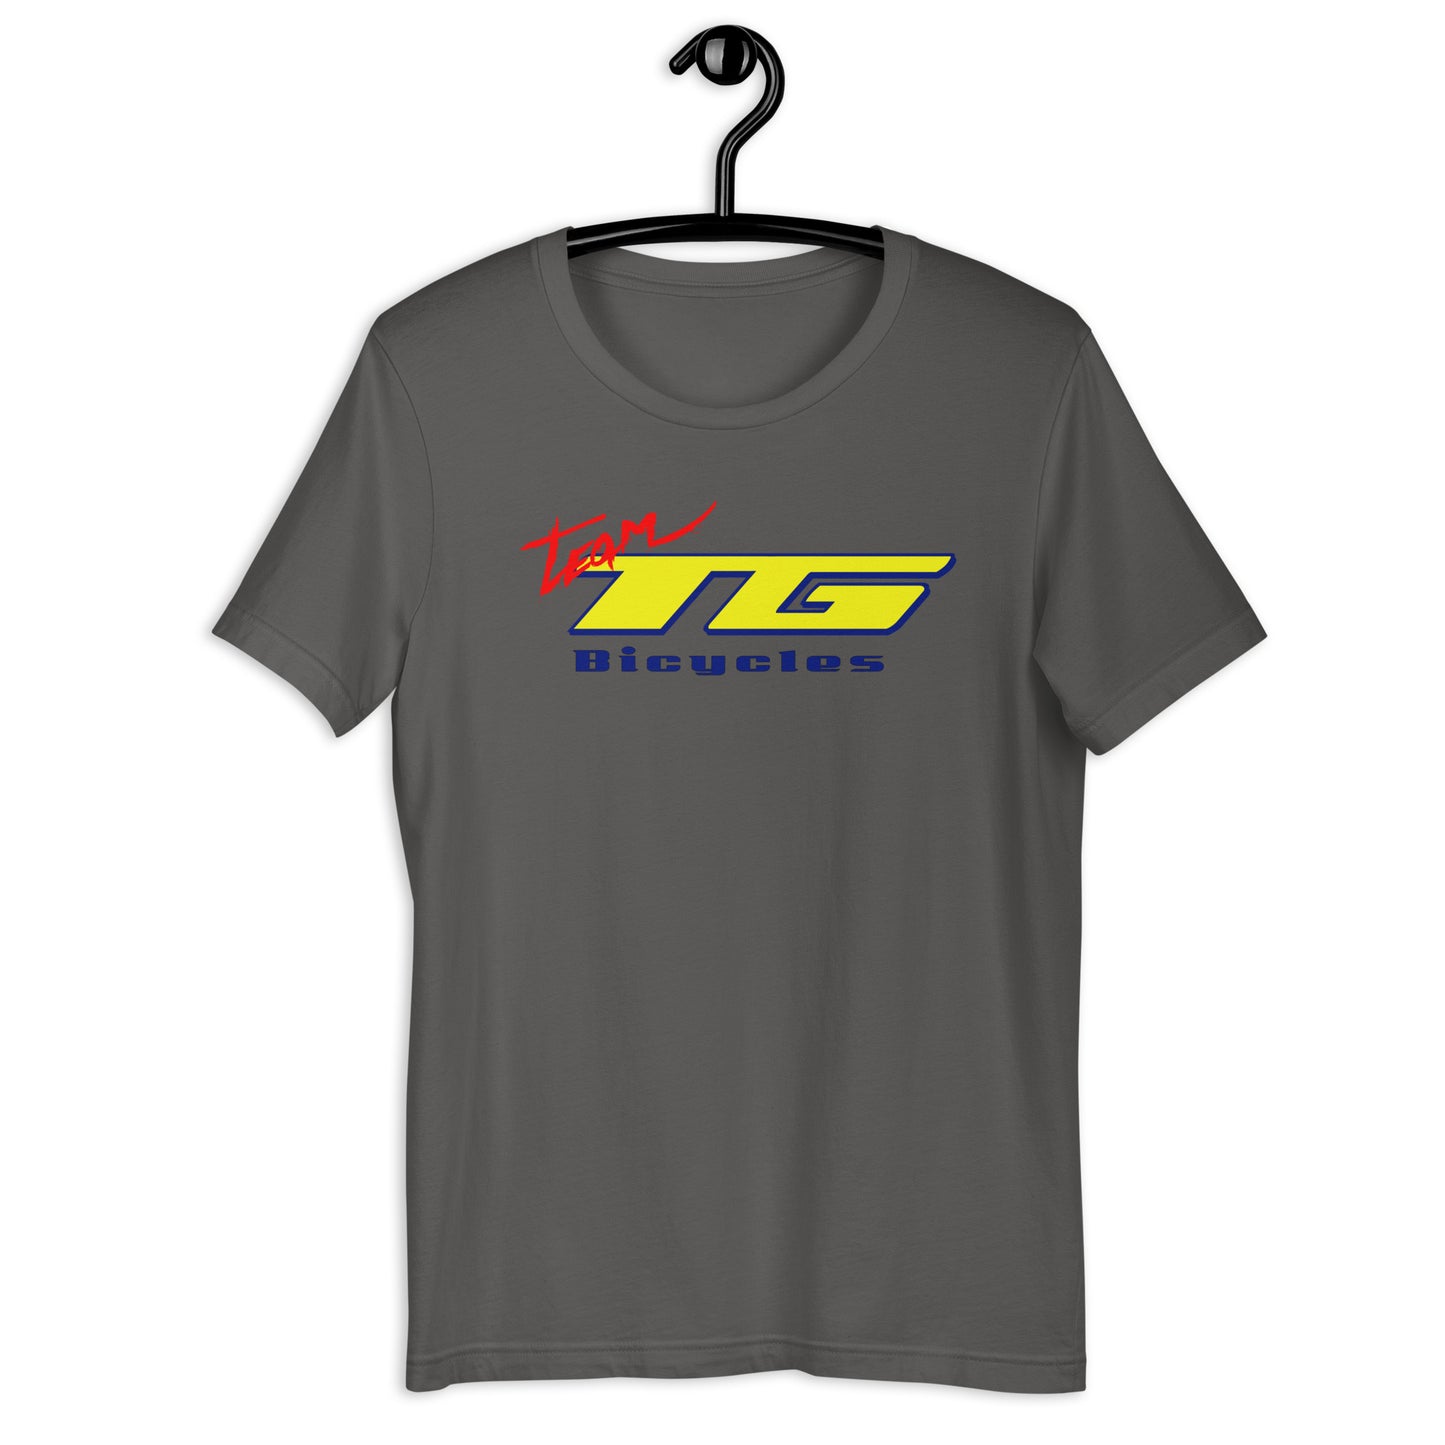 Tainted Goods TEAM TG BICYCLES Tee